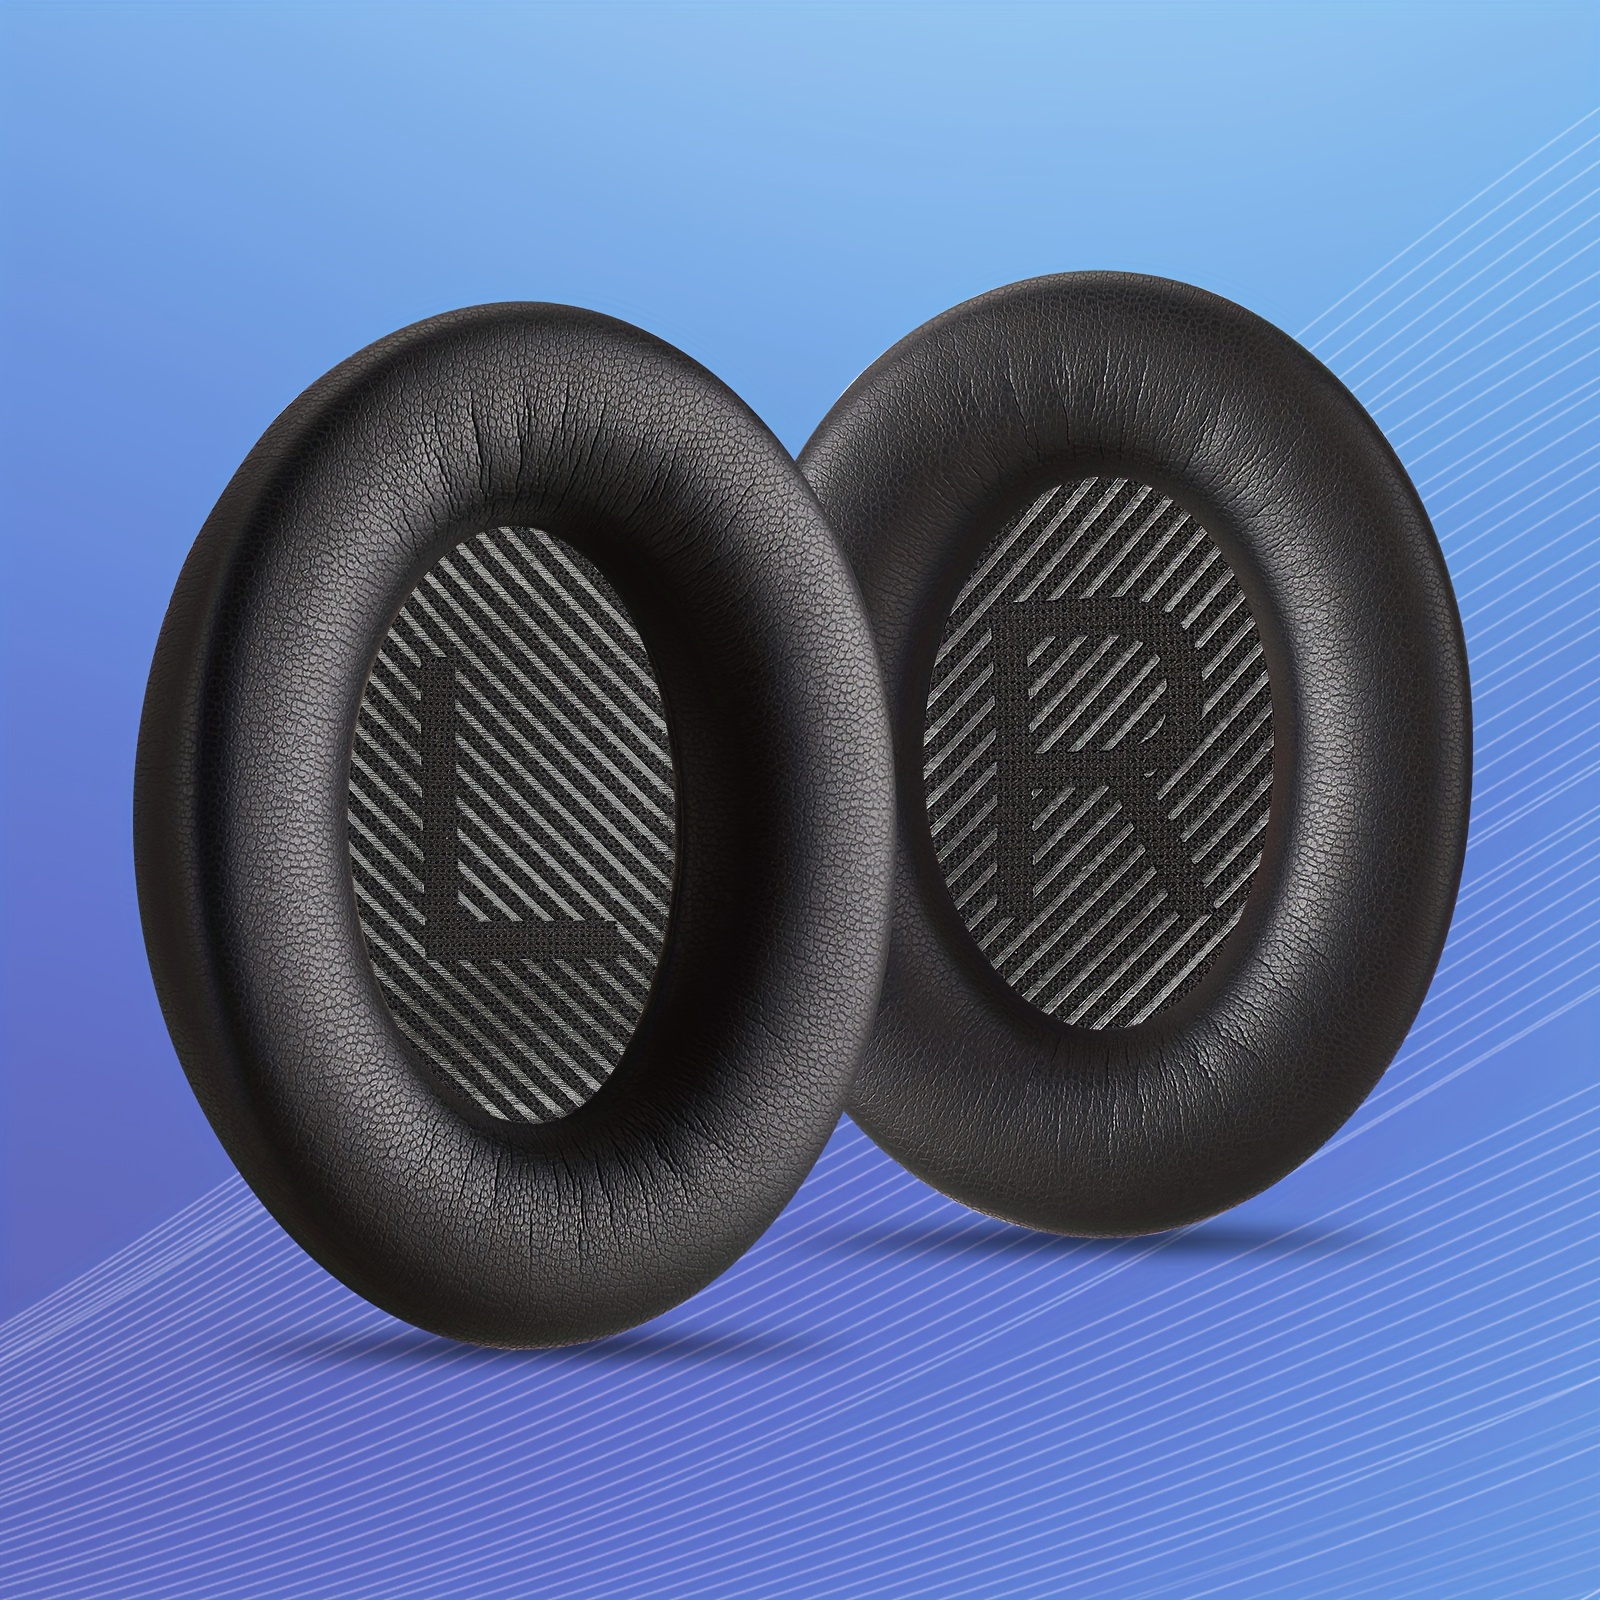  SOULWIT Cooling Gel Ear Pads Cushions Replacement For Bose  QuietComfort 45 (QC45)/QuietComfort SE (QC SE)/New Quiet Comfort Wireless  Over-Ear Headphones, Earpads